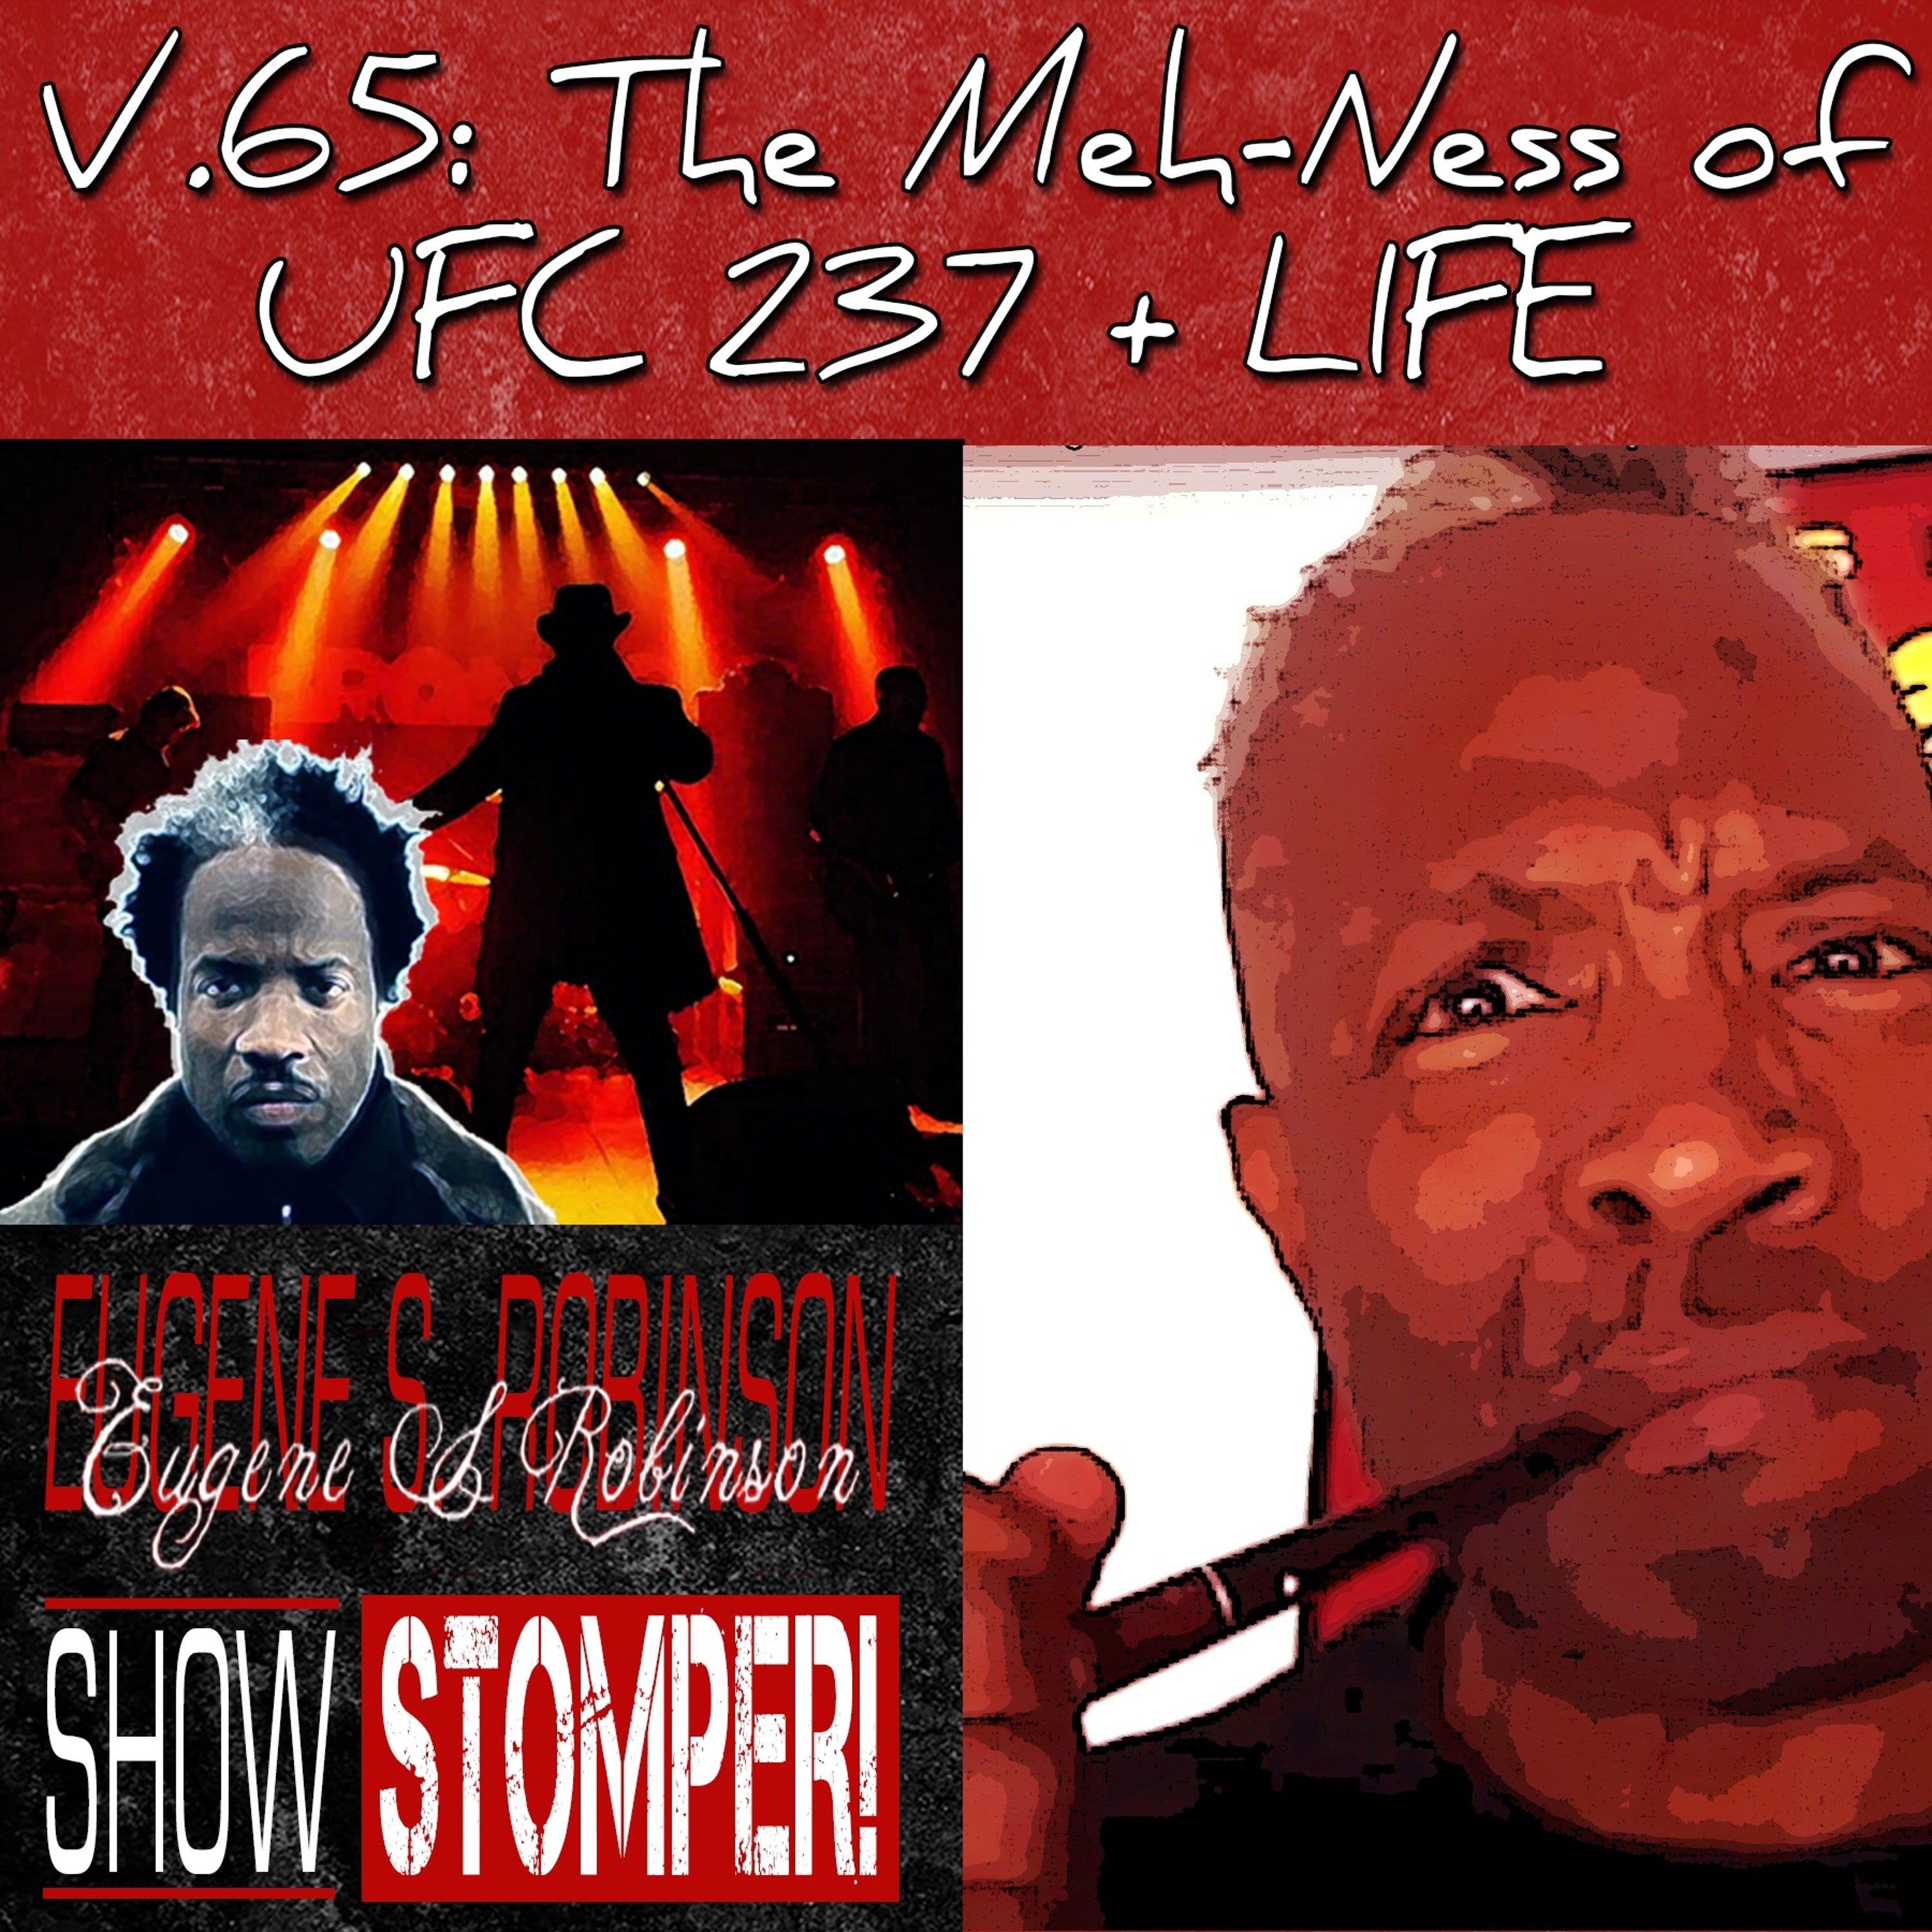 V.65 The Meh - Ness Of UFC 237 + LIFE On The Eugene S. Robinson Show Stomper!